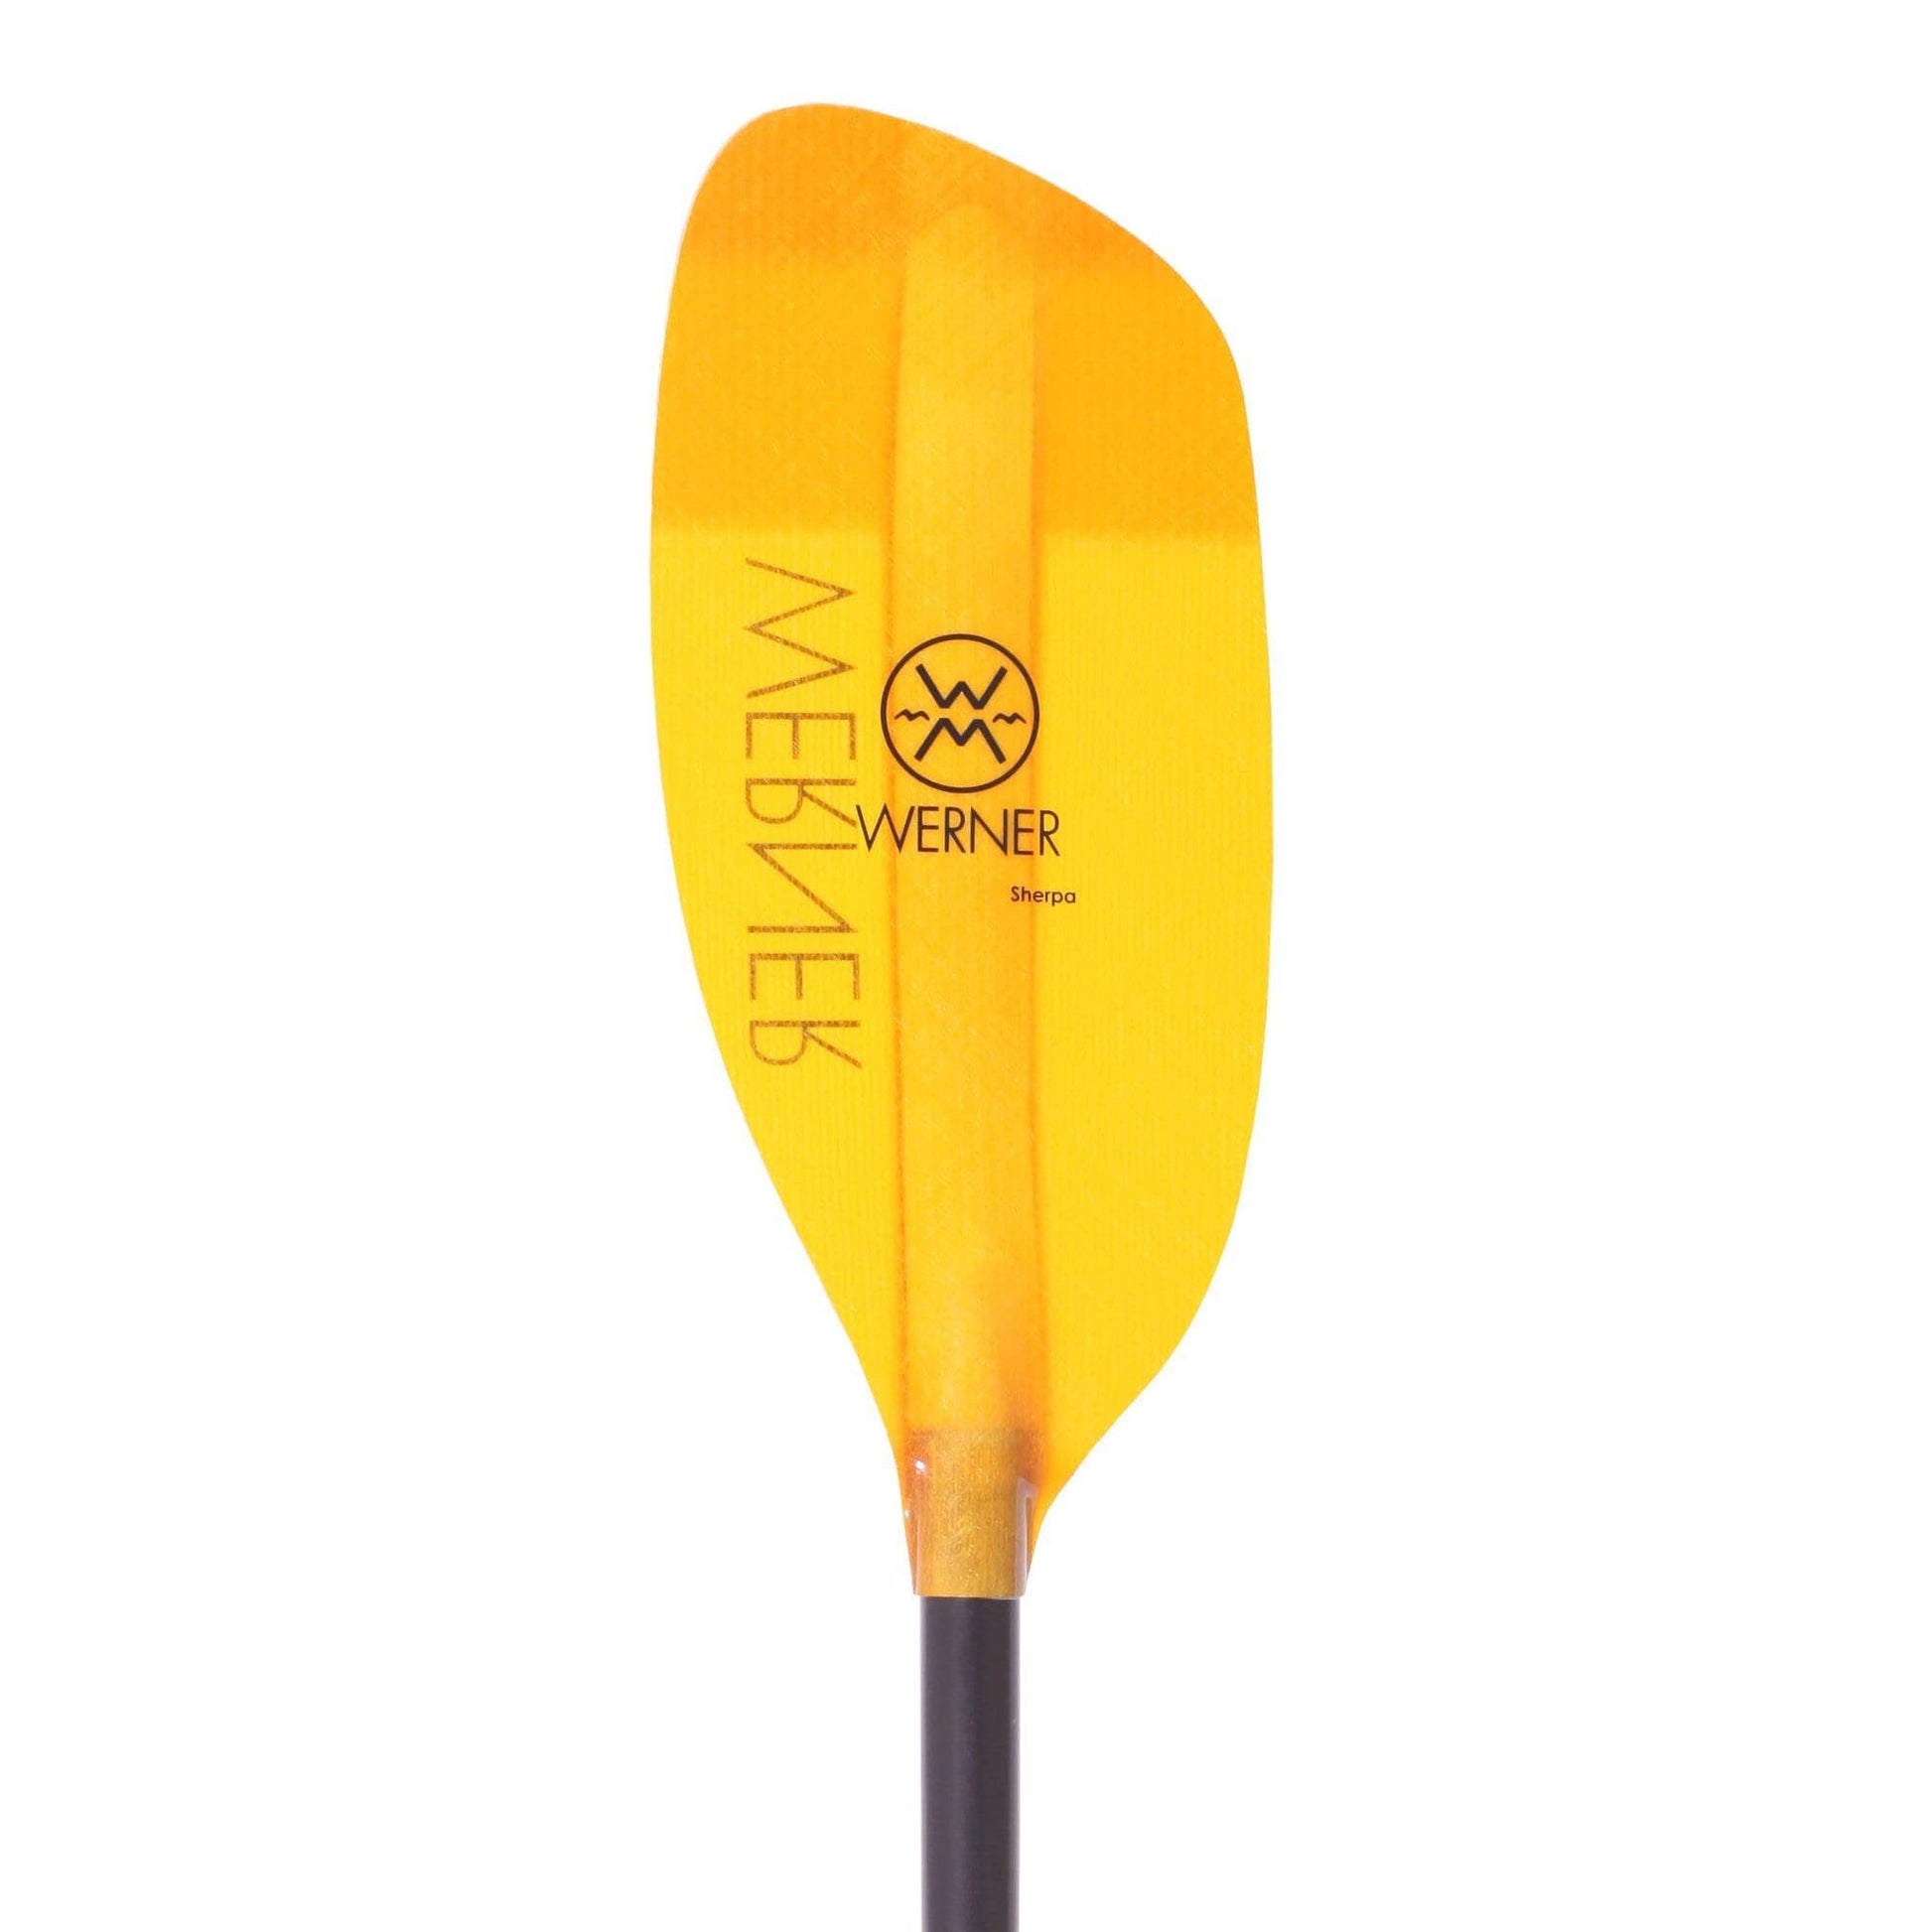 Featuring the Sherpa 2-Piece Kayak Paddle breakdown paddle, fiberglass whitewater paddle, hand paddle, ik paddle, pack raft paddle manufactured by Werner shown here from one angle.